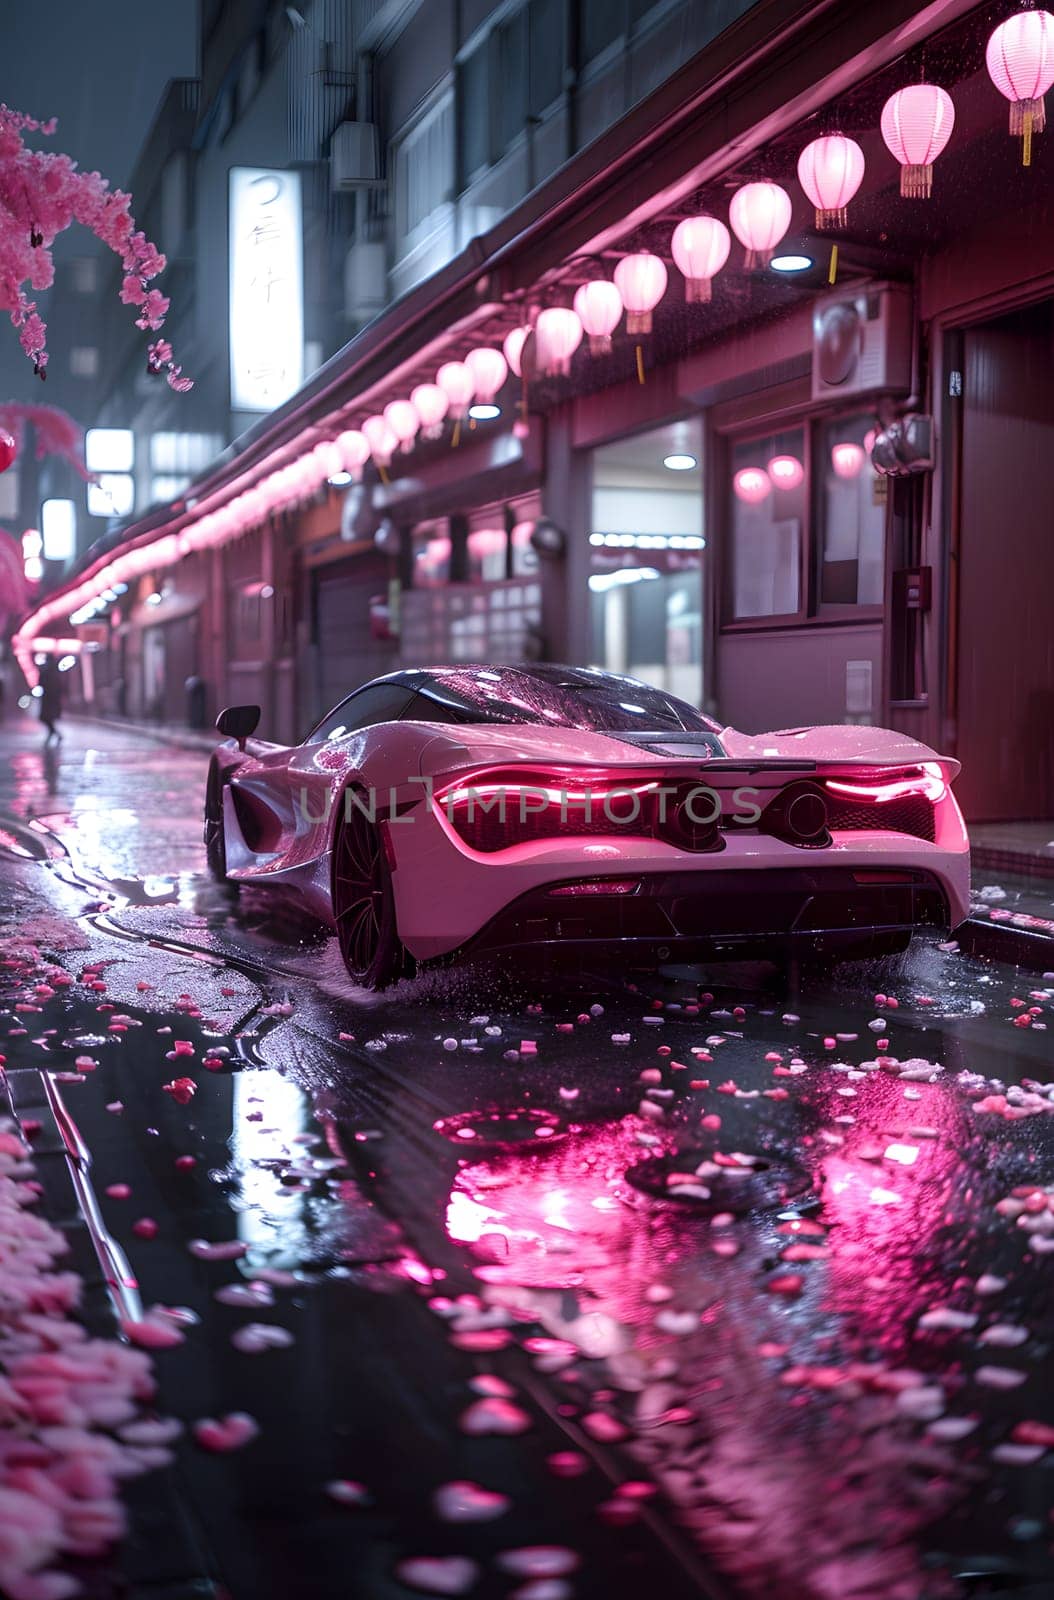 A sleek white sports car with automotive lighting is cruising down a wet street at night, showcasing its stunning automotive design and exterior as it passes by buildings